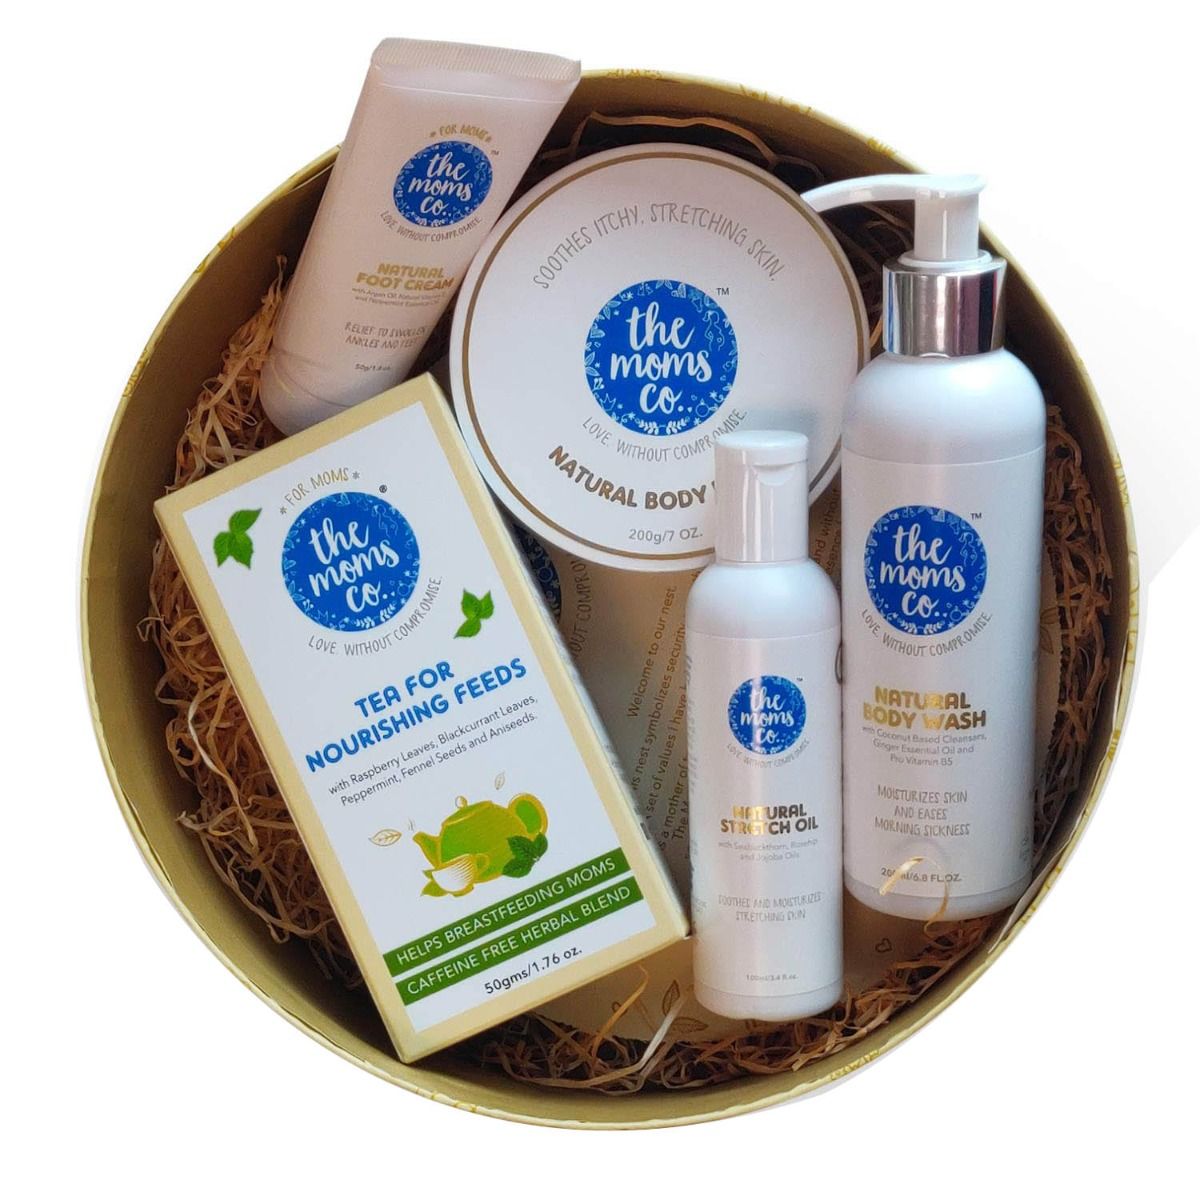 Buy The Moms Co. Moms Care Gift Box, 5 Gift Items Online